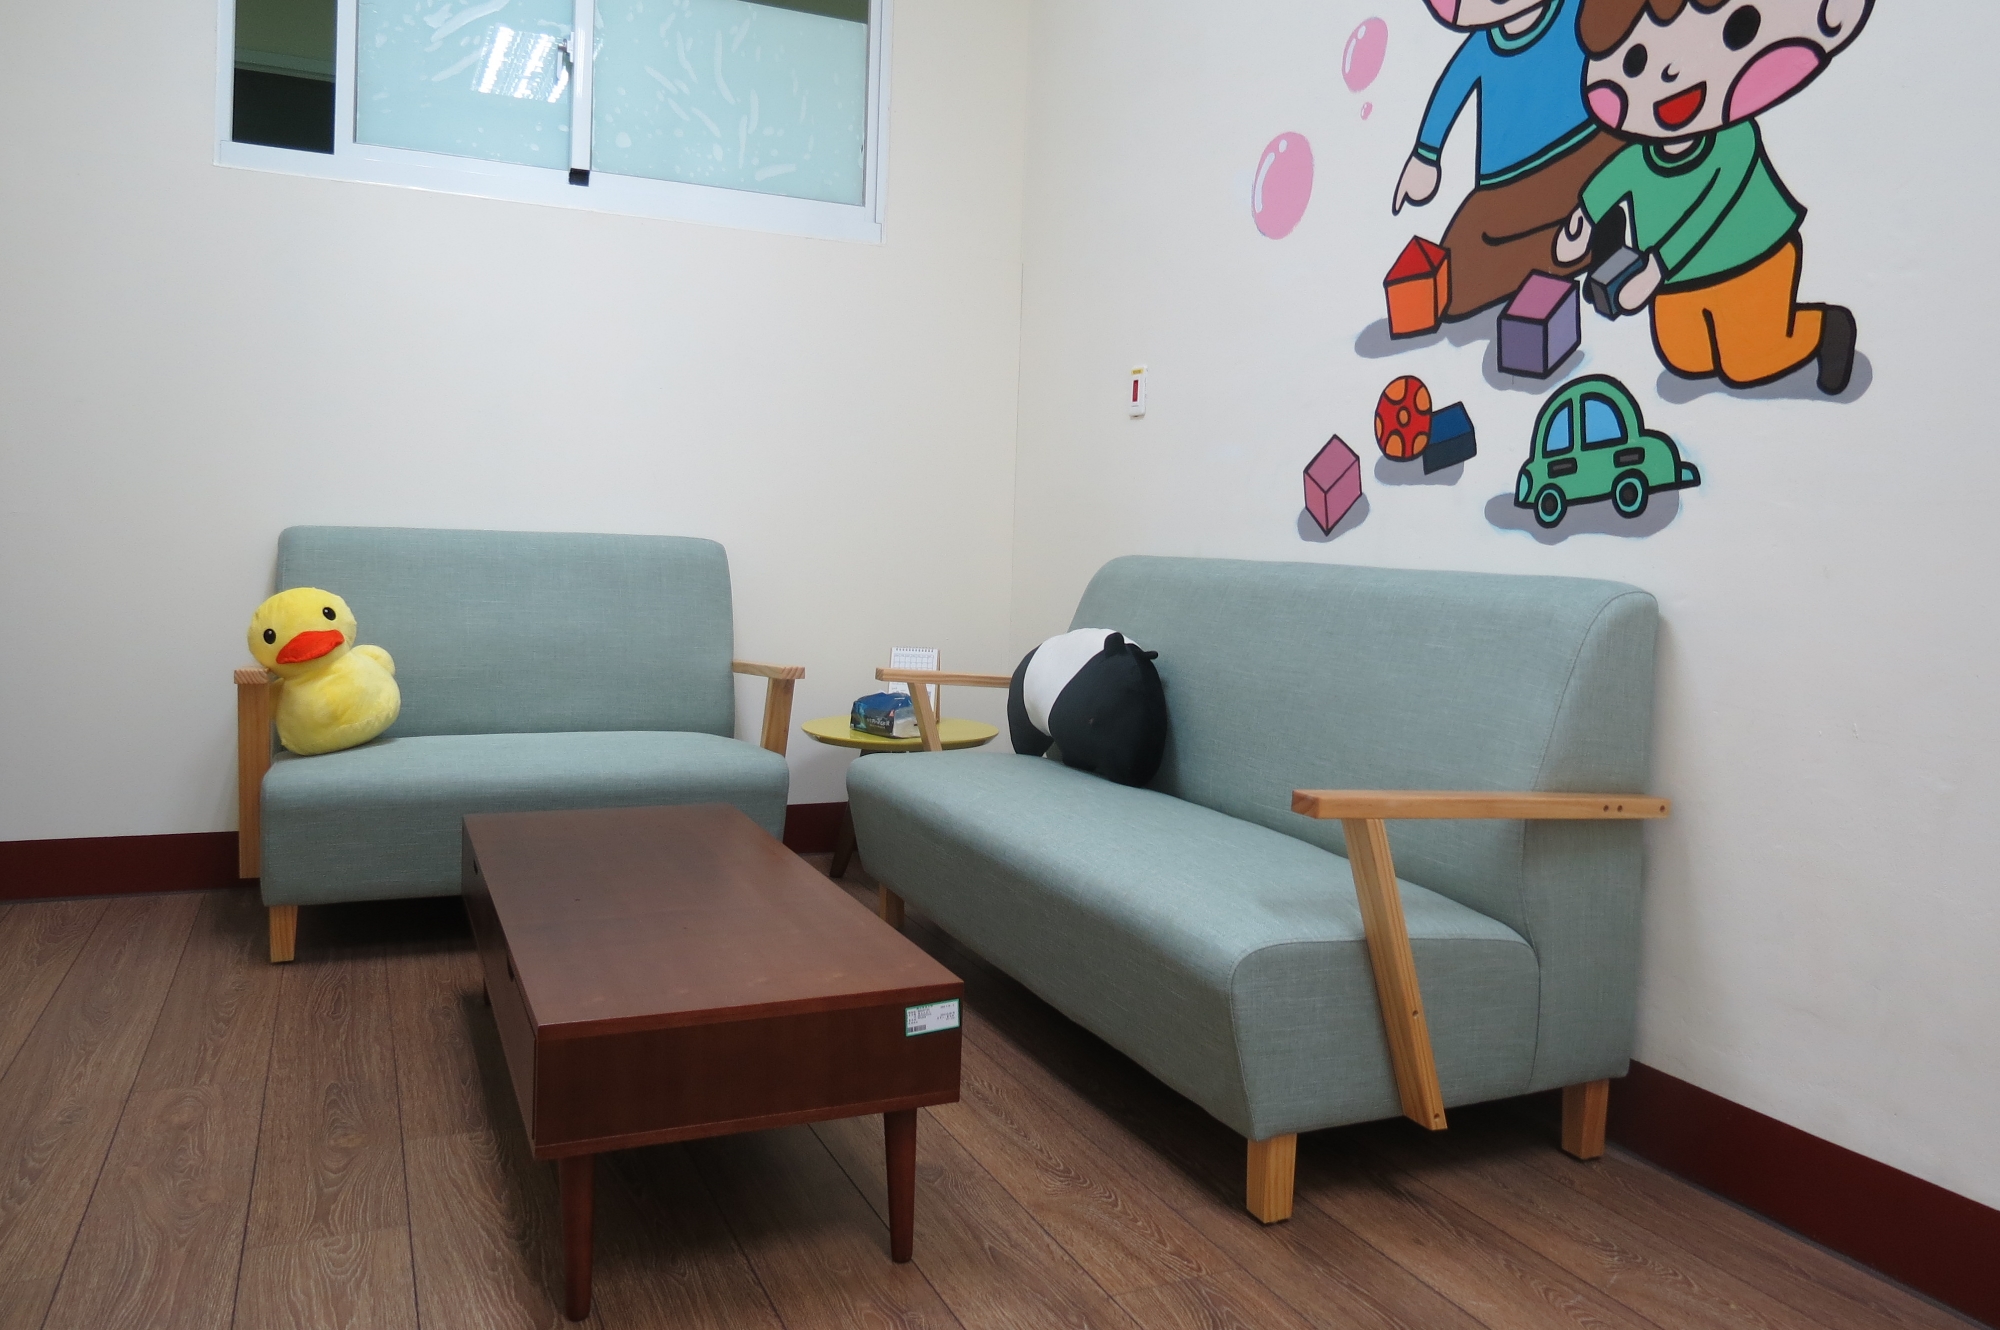 Couple and Family Therapy Room